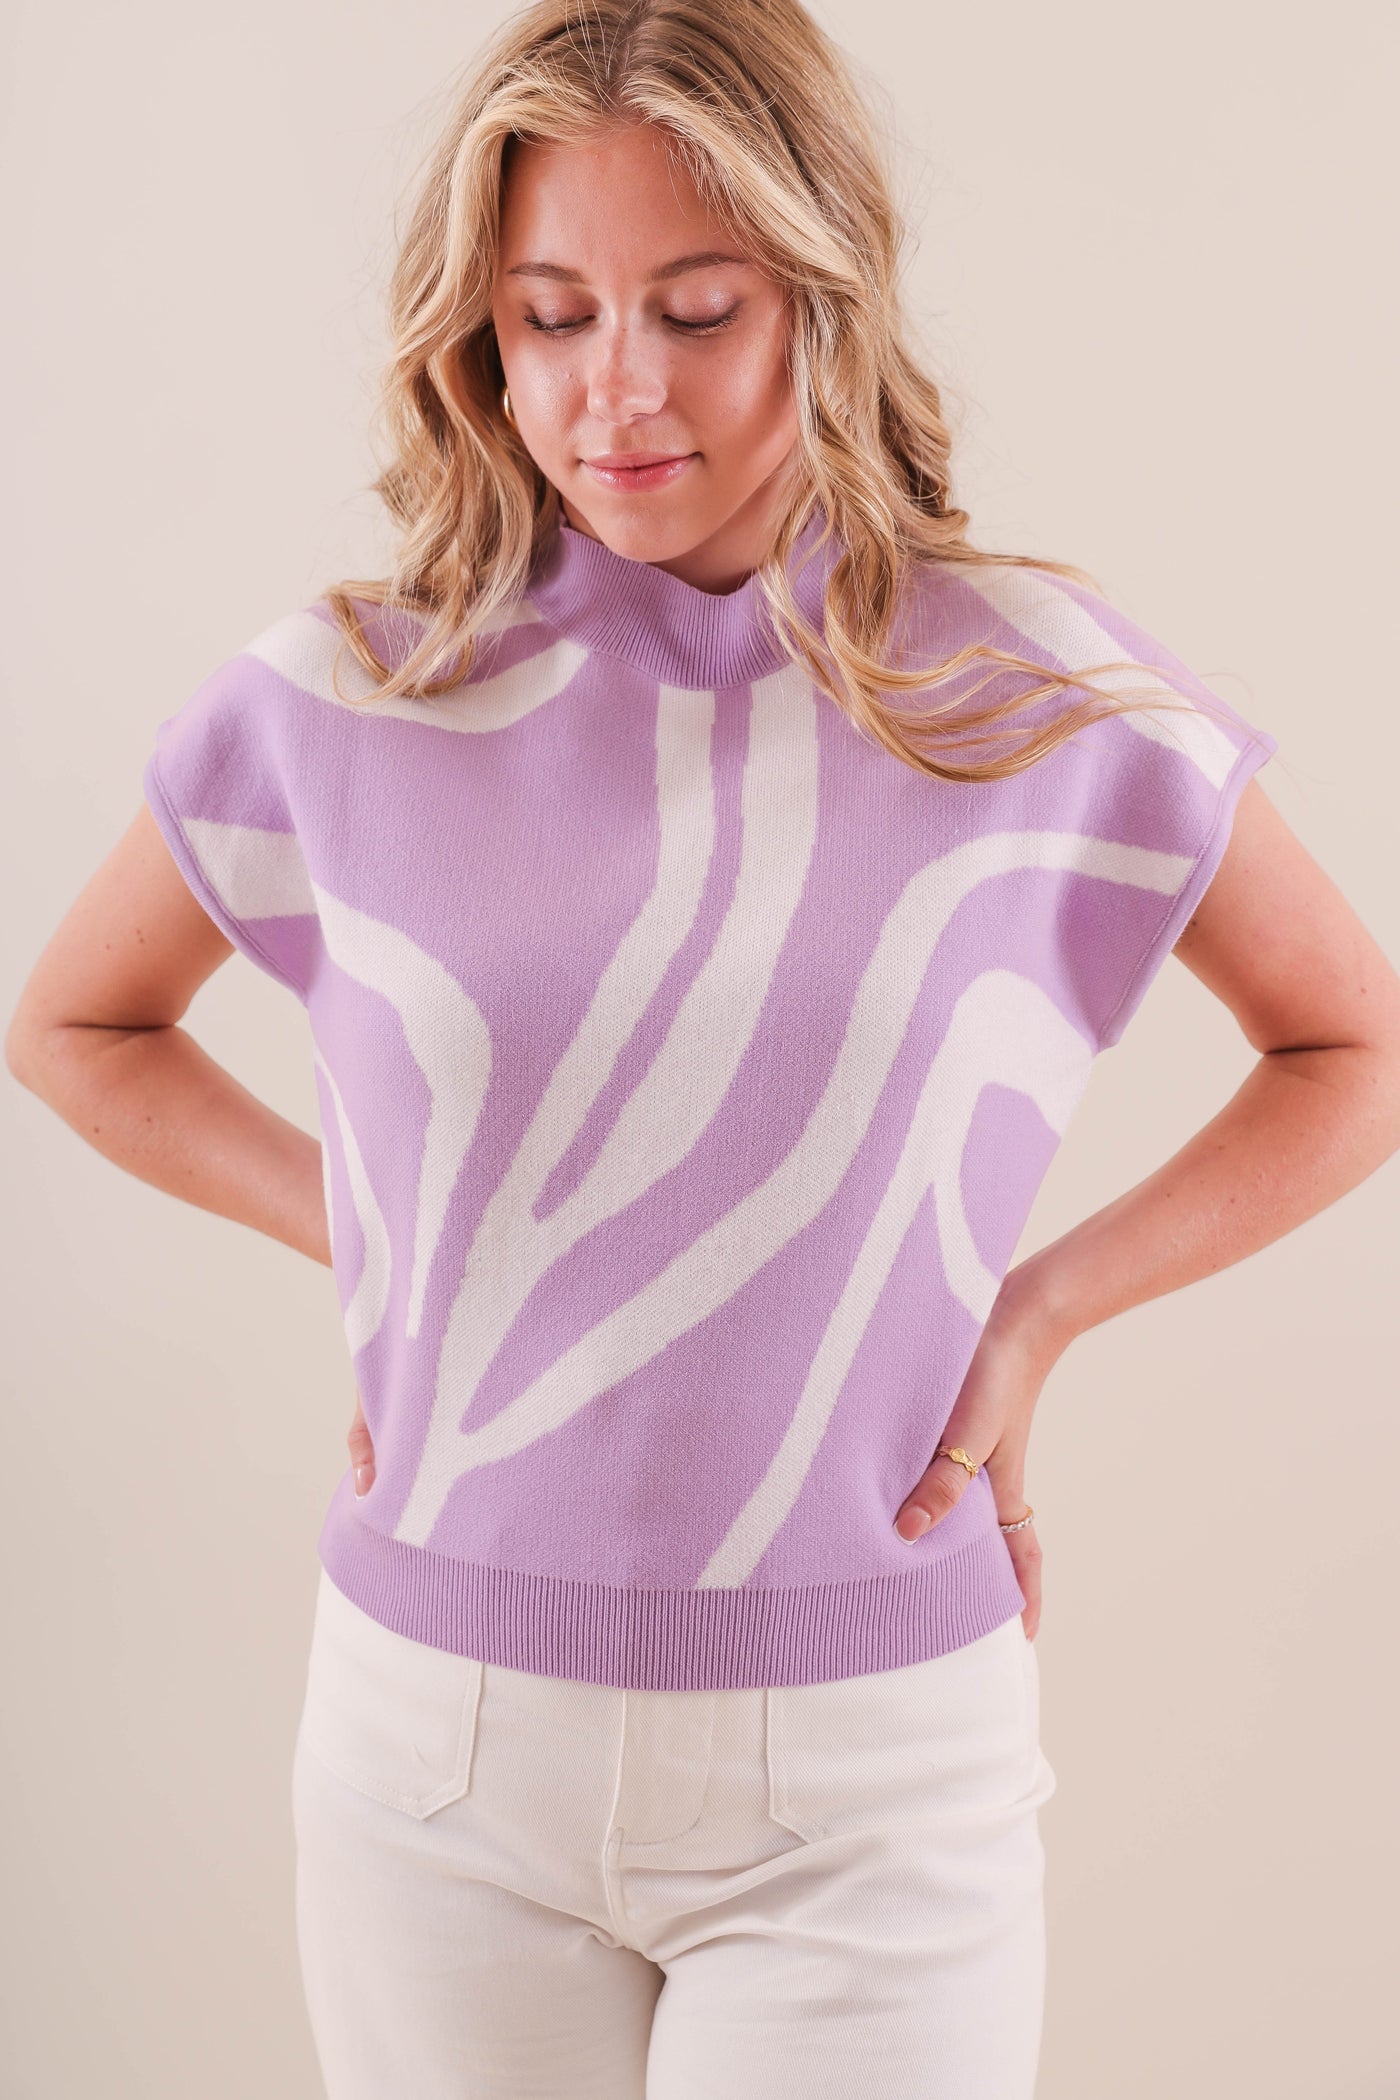 Women's Purple and White Blouse- Women's Preppy Tops- Eesome Tops